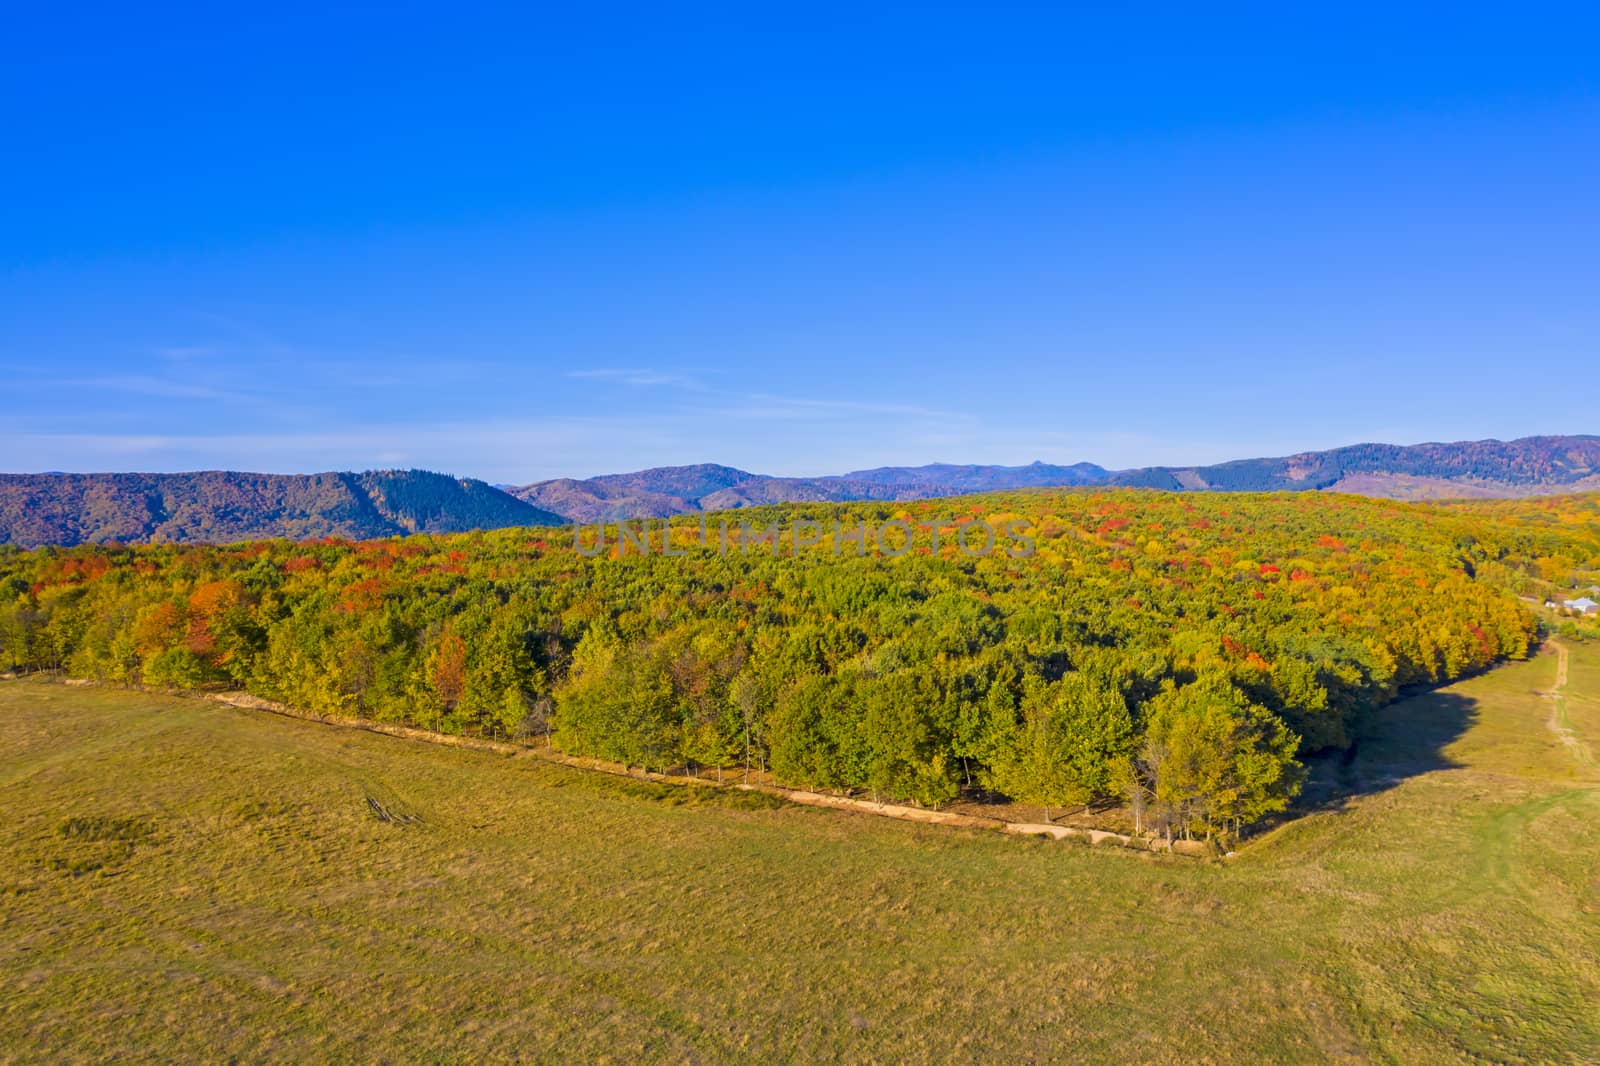 Pasture and forest trees in a aerial autumn landscape against blue sky